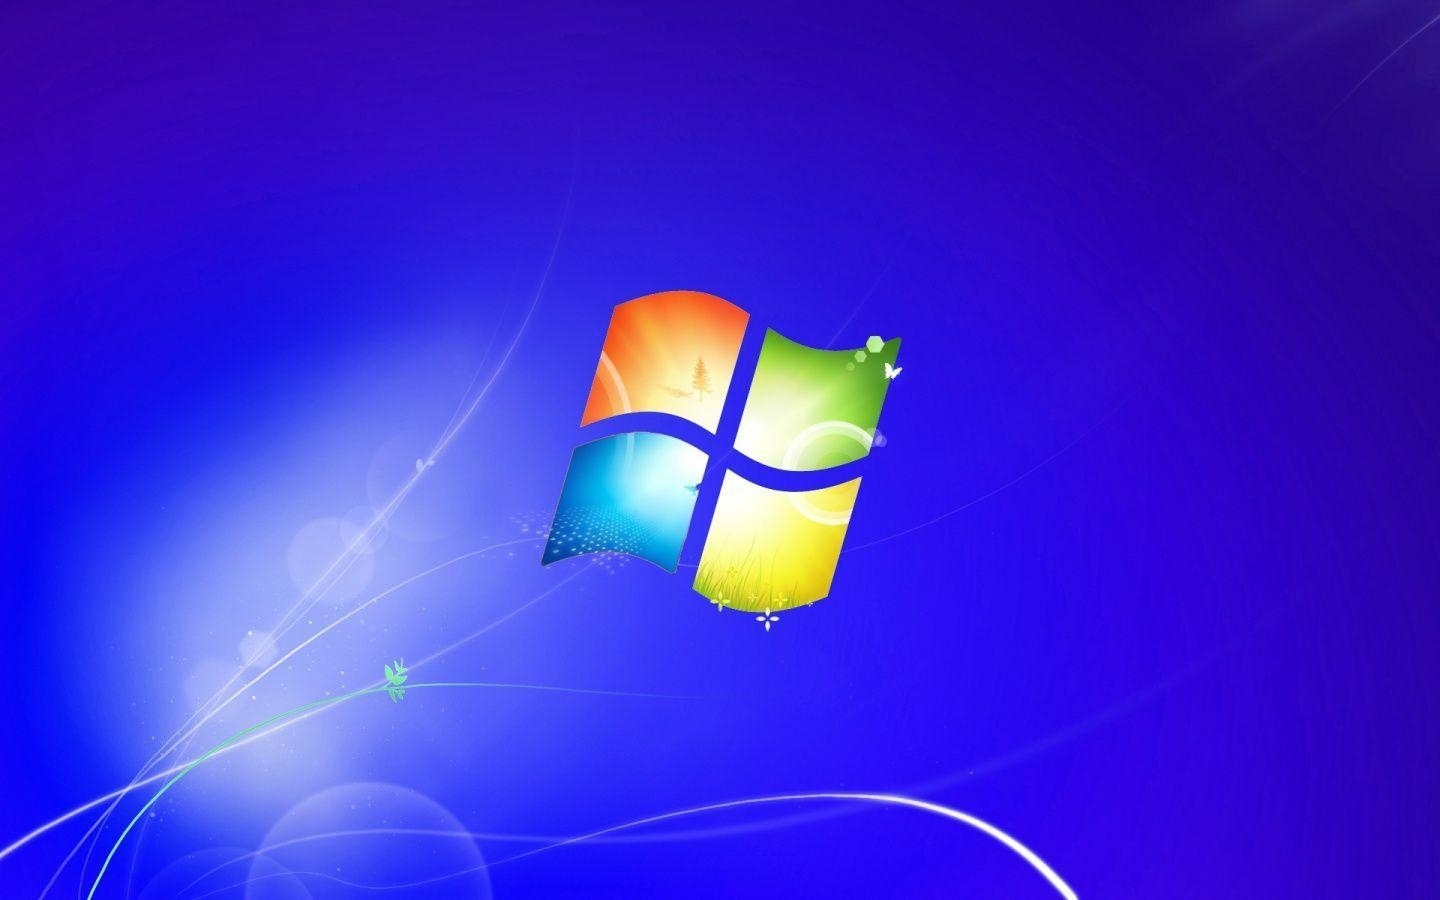 10 Best Blue Windows 7 Background FULL HD 1080p For PC Background 2021